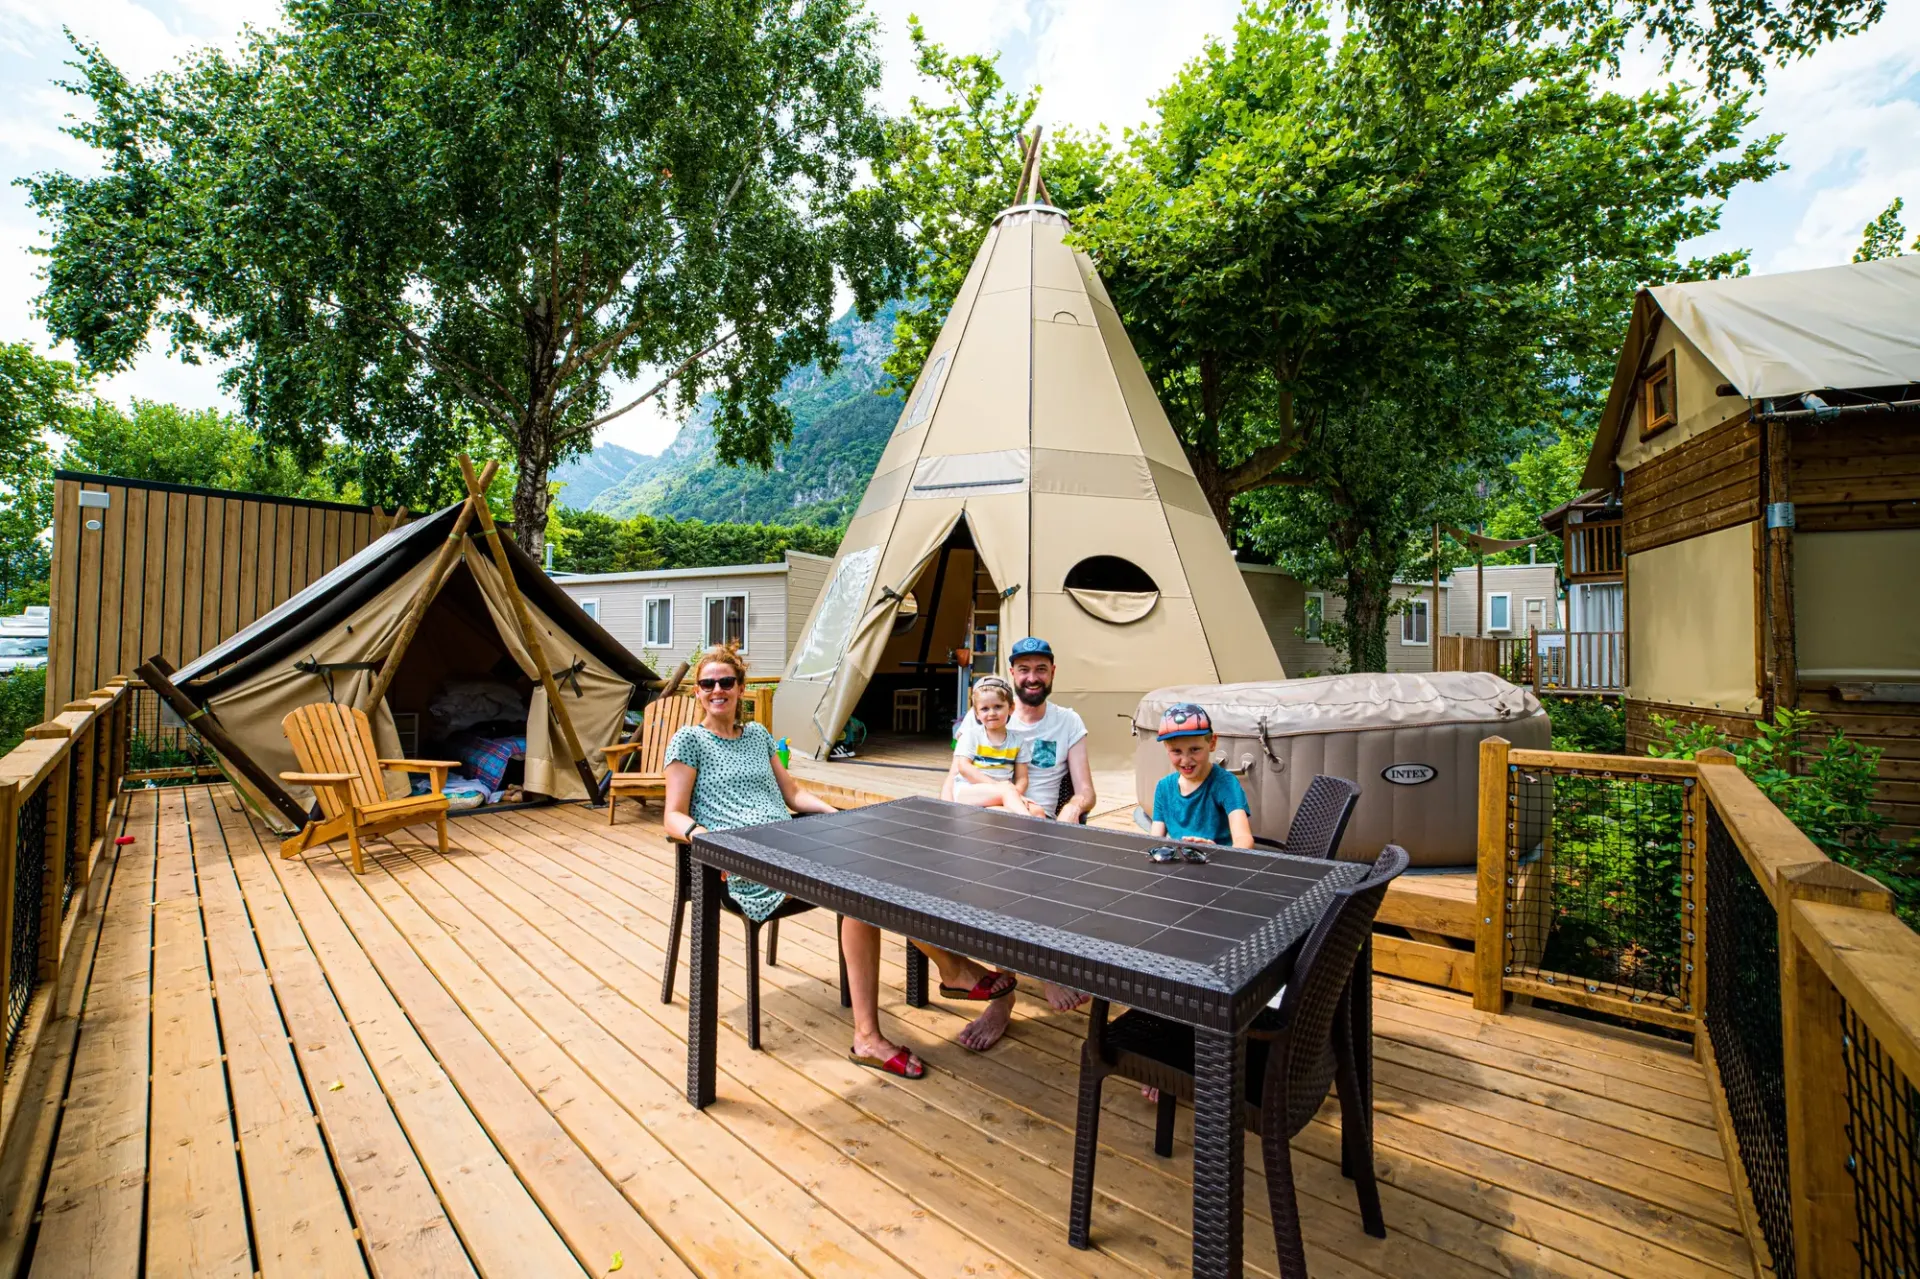 The true glamping experience